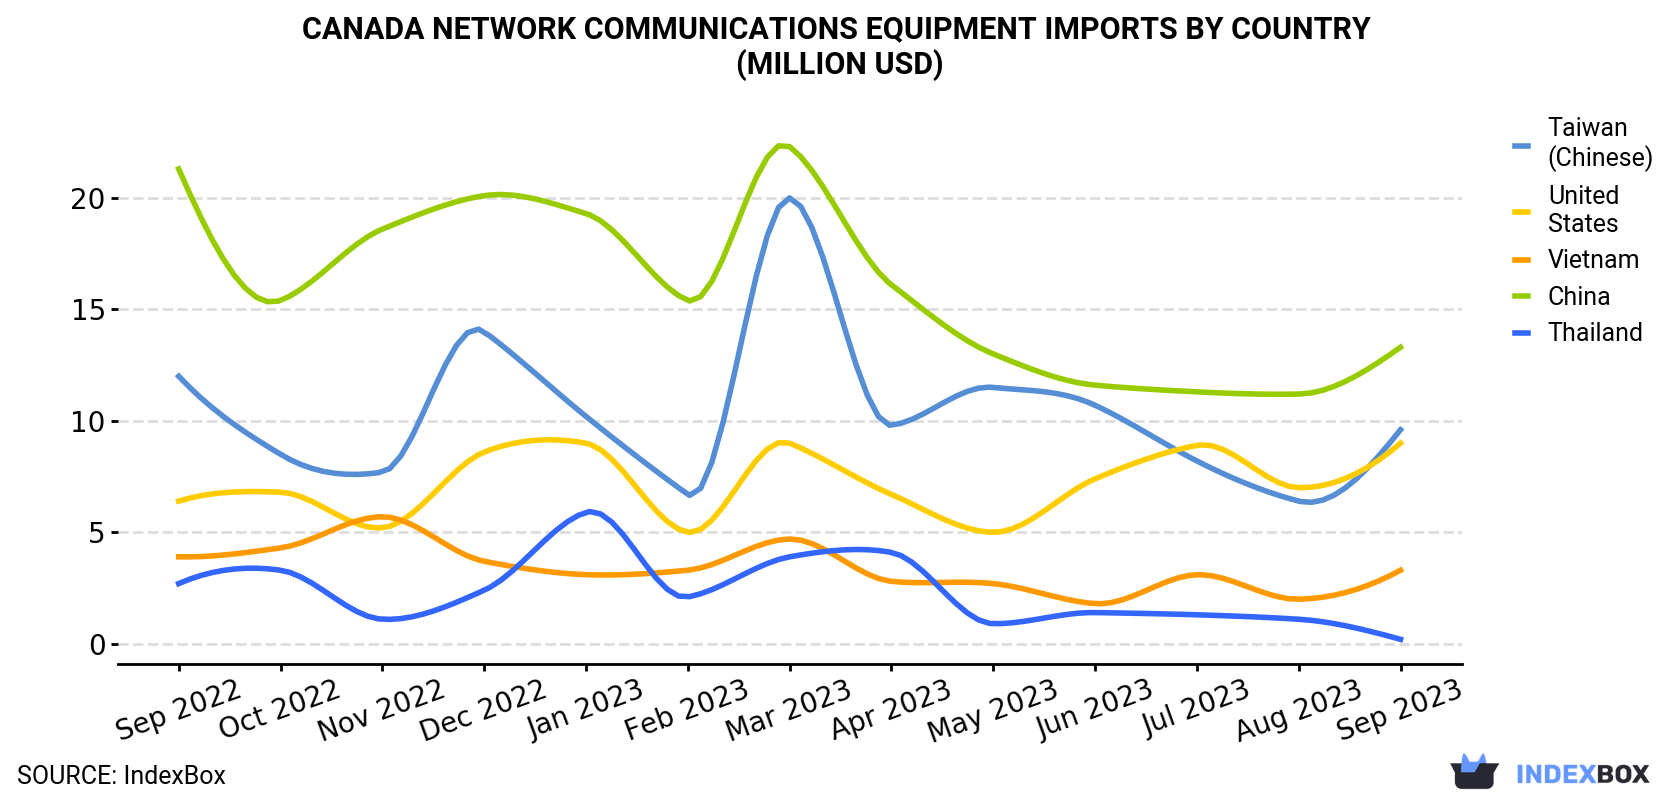 Canada Network Communications Equipment Imports By Country (Million USD)